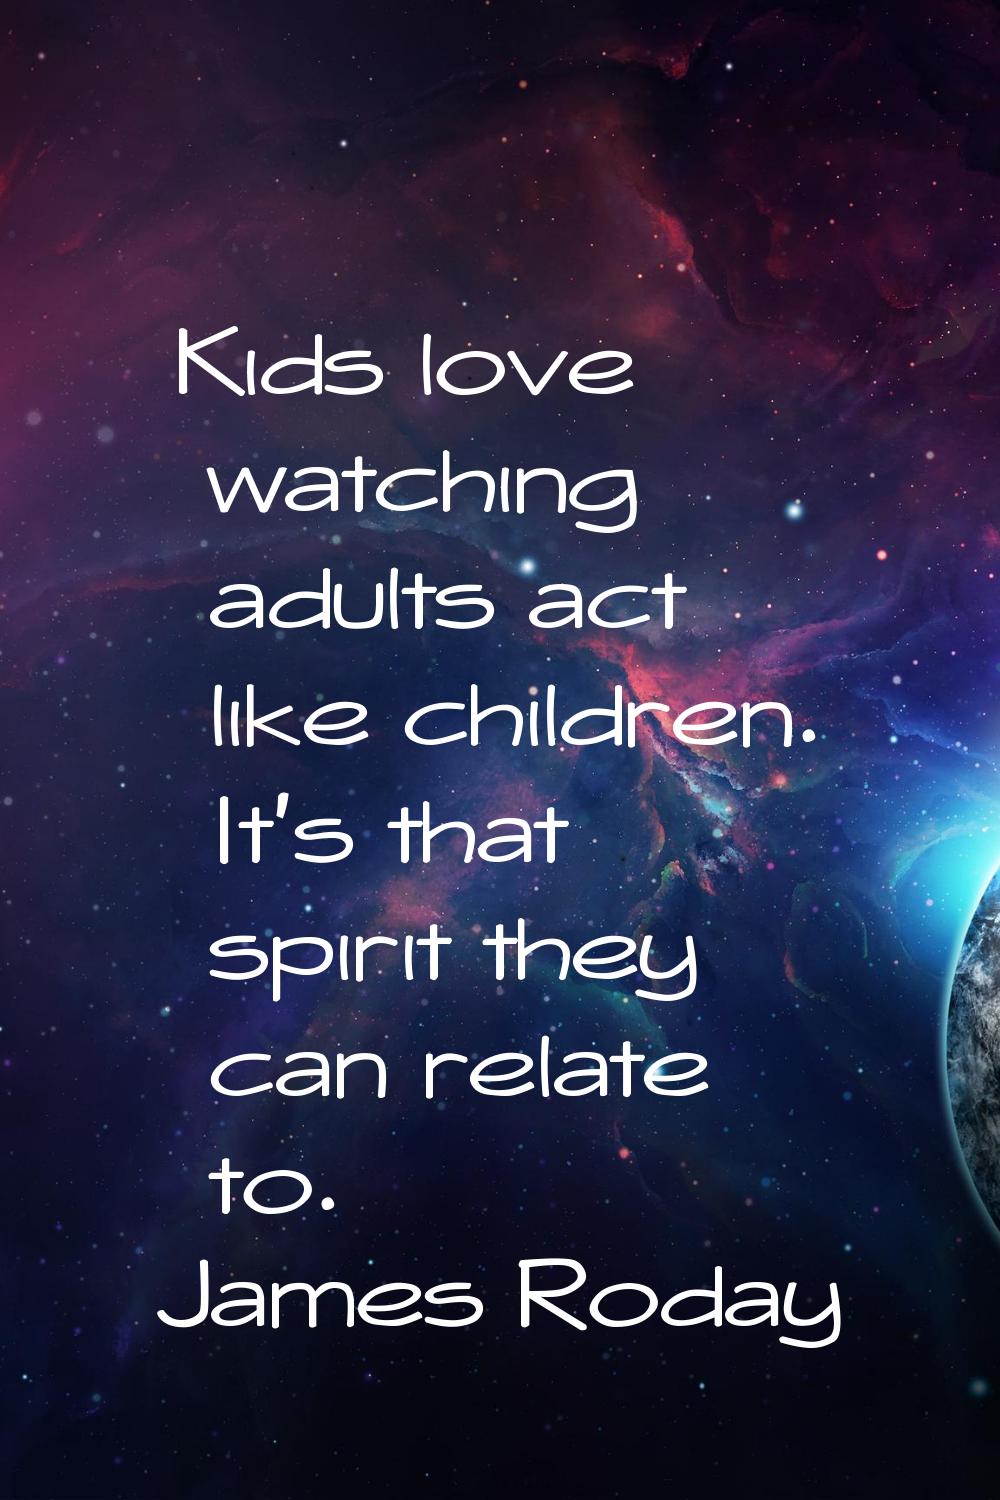 Kids love watching adults act like children. It's that spirit they can relate to.